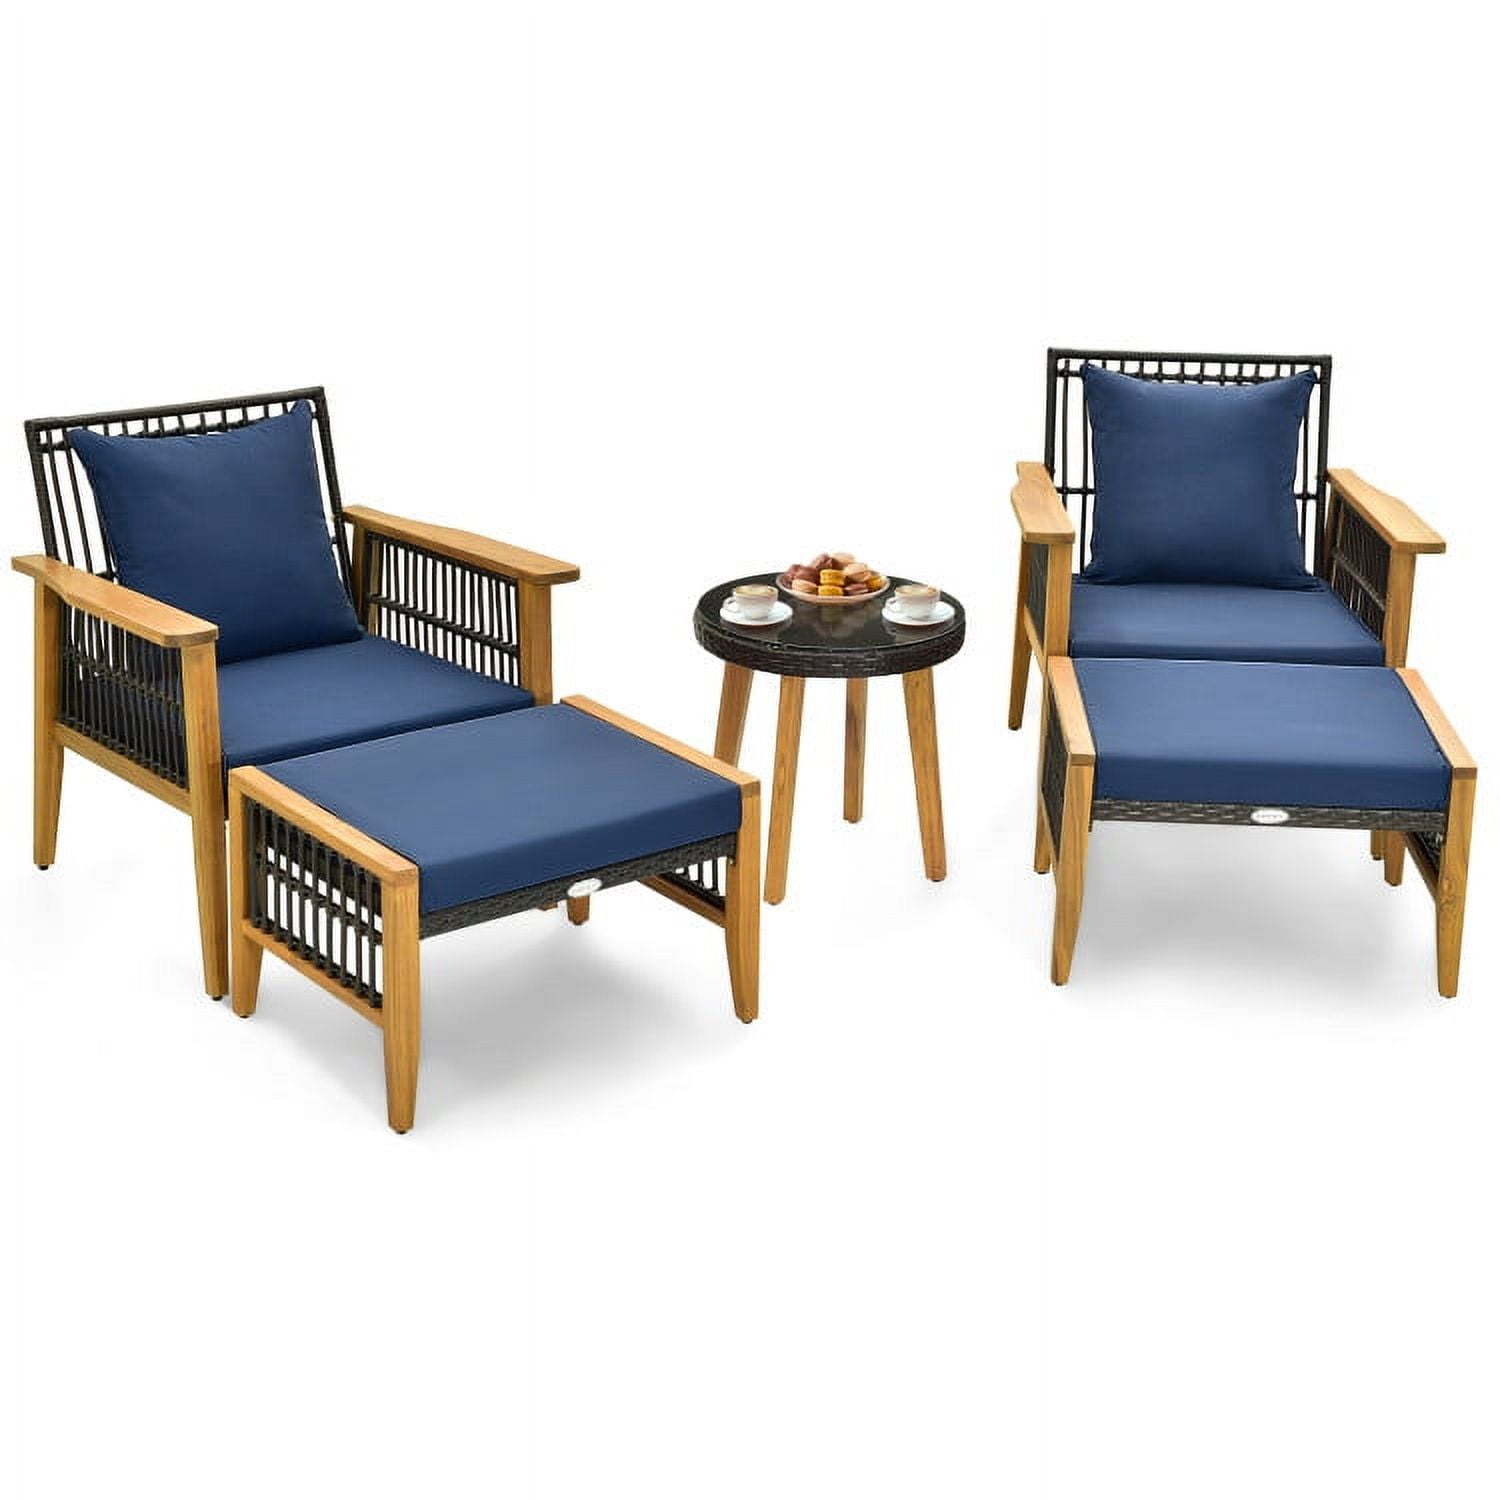 Aimee Lii 5 Piece Outdoor Conversation Set with Stable Acacia Wood Frame, Outdoor Patio Set, Navy